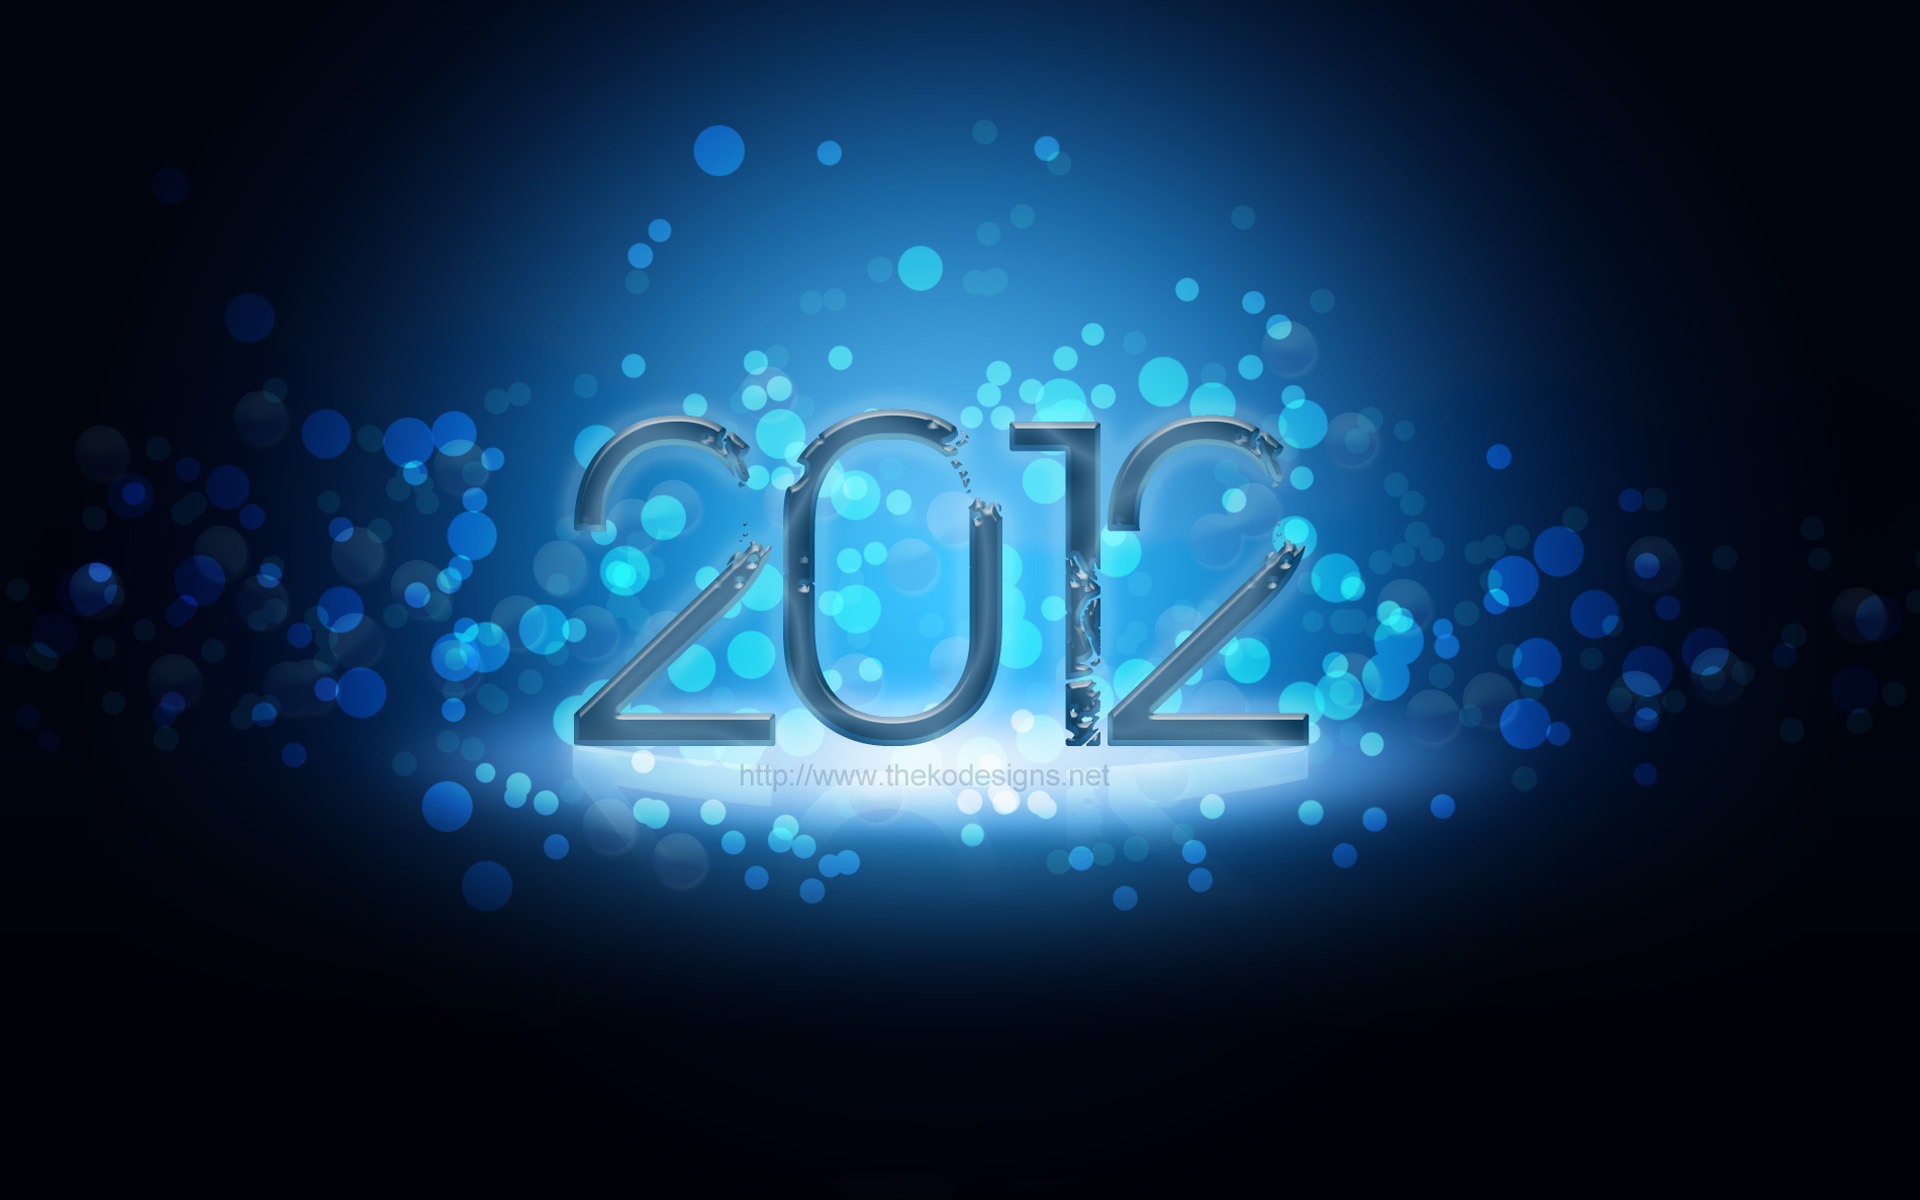 2012 New Year wallpapers (1) #13 - 1920x1200